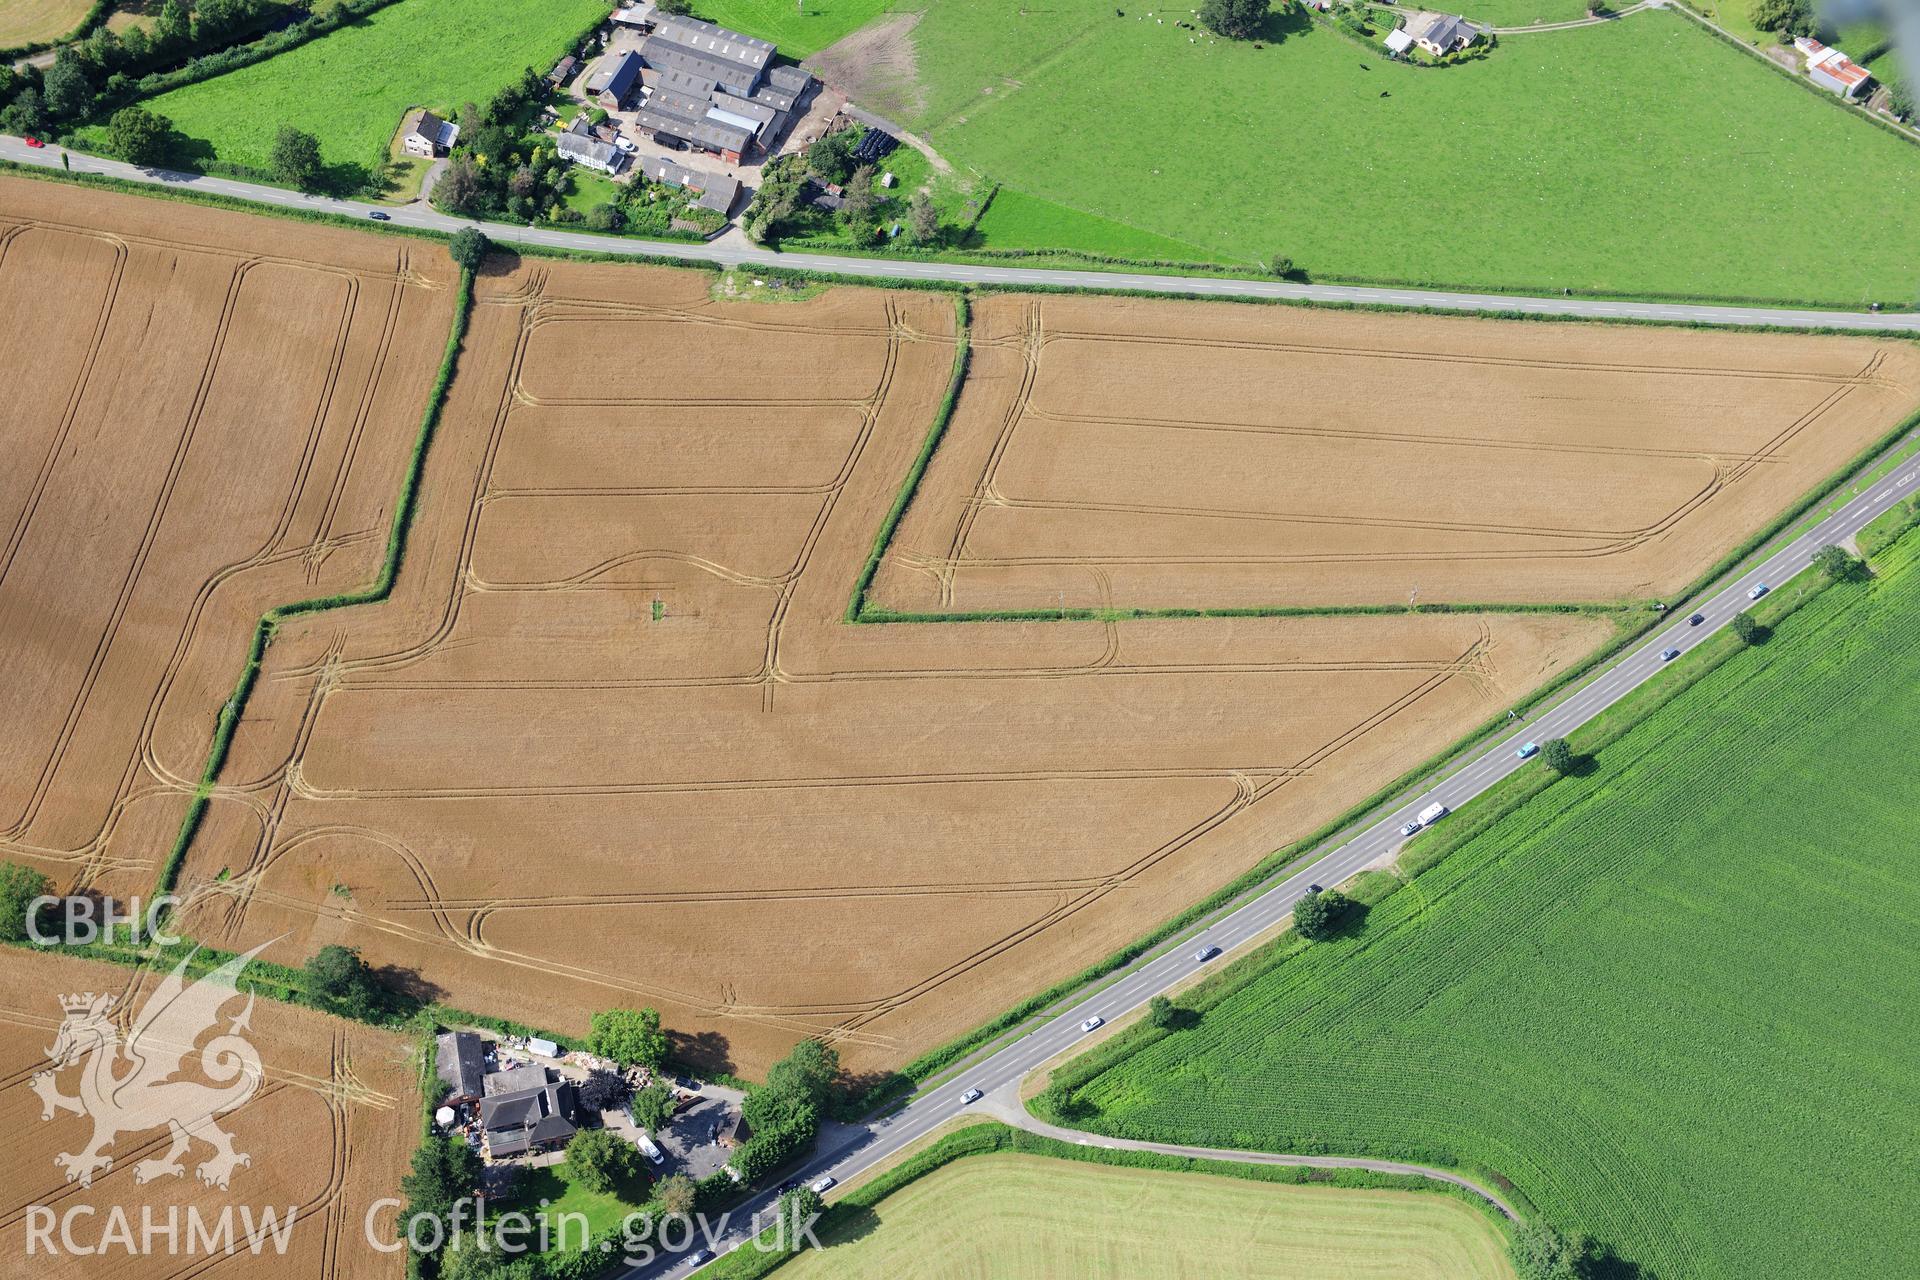 RCAHMW colour oblique photograph of cropmark complex, Lower Rectory Road. Taken by Toby Driver on 10/08/2012.